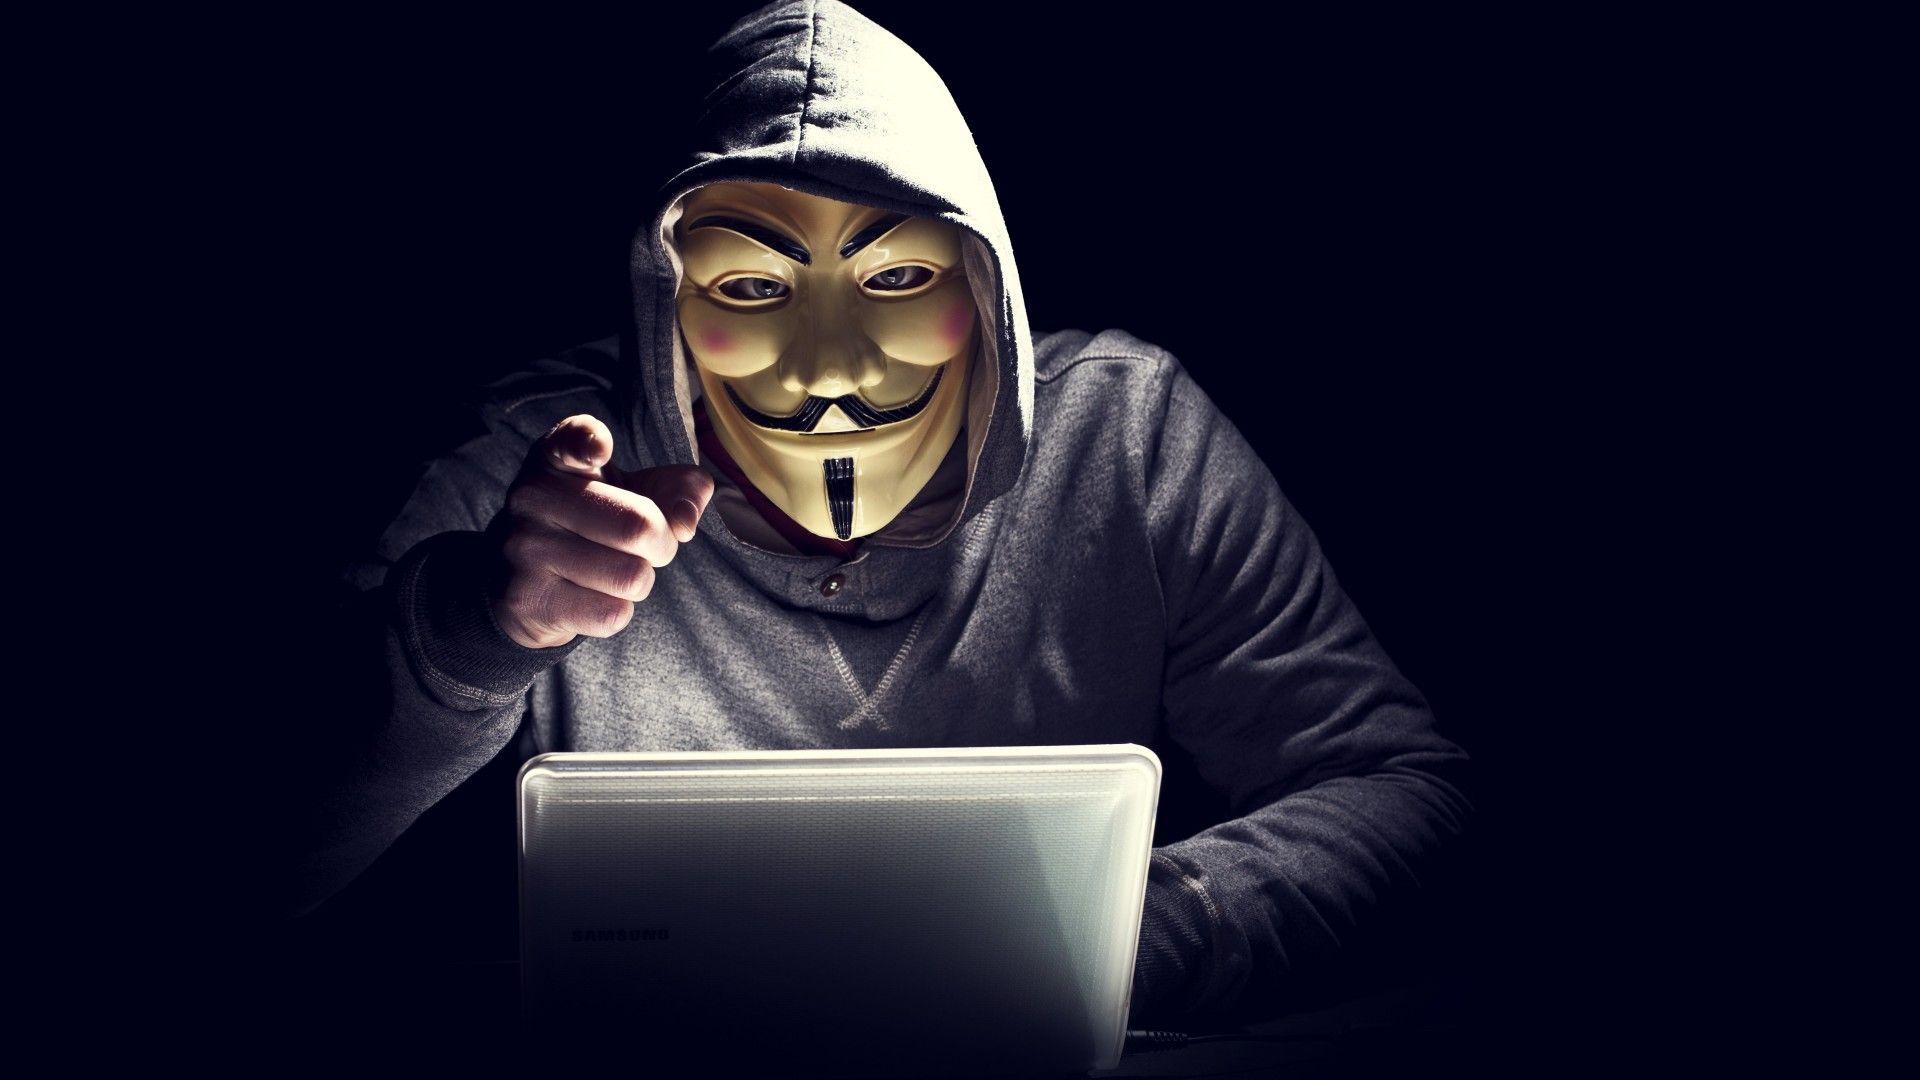 Anonymous Hacker Hd Mobile Wallpapers Hd Images